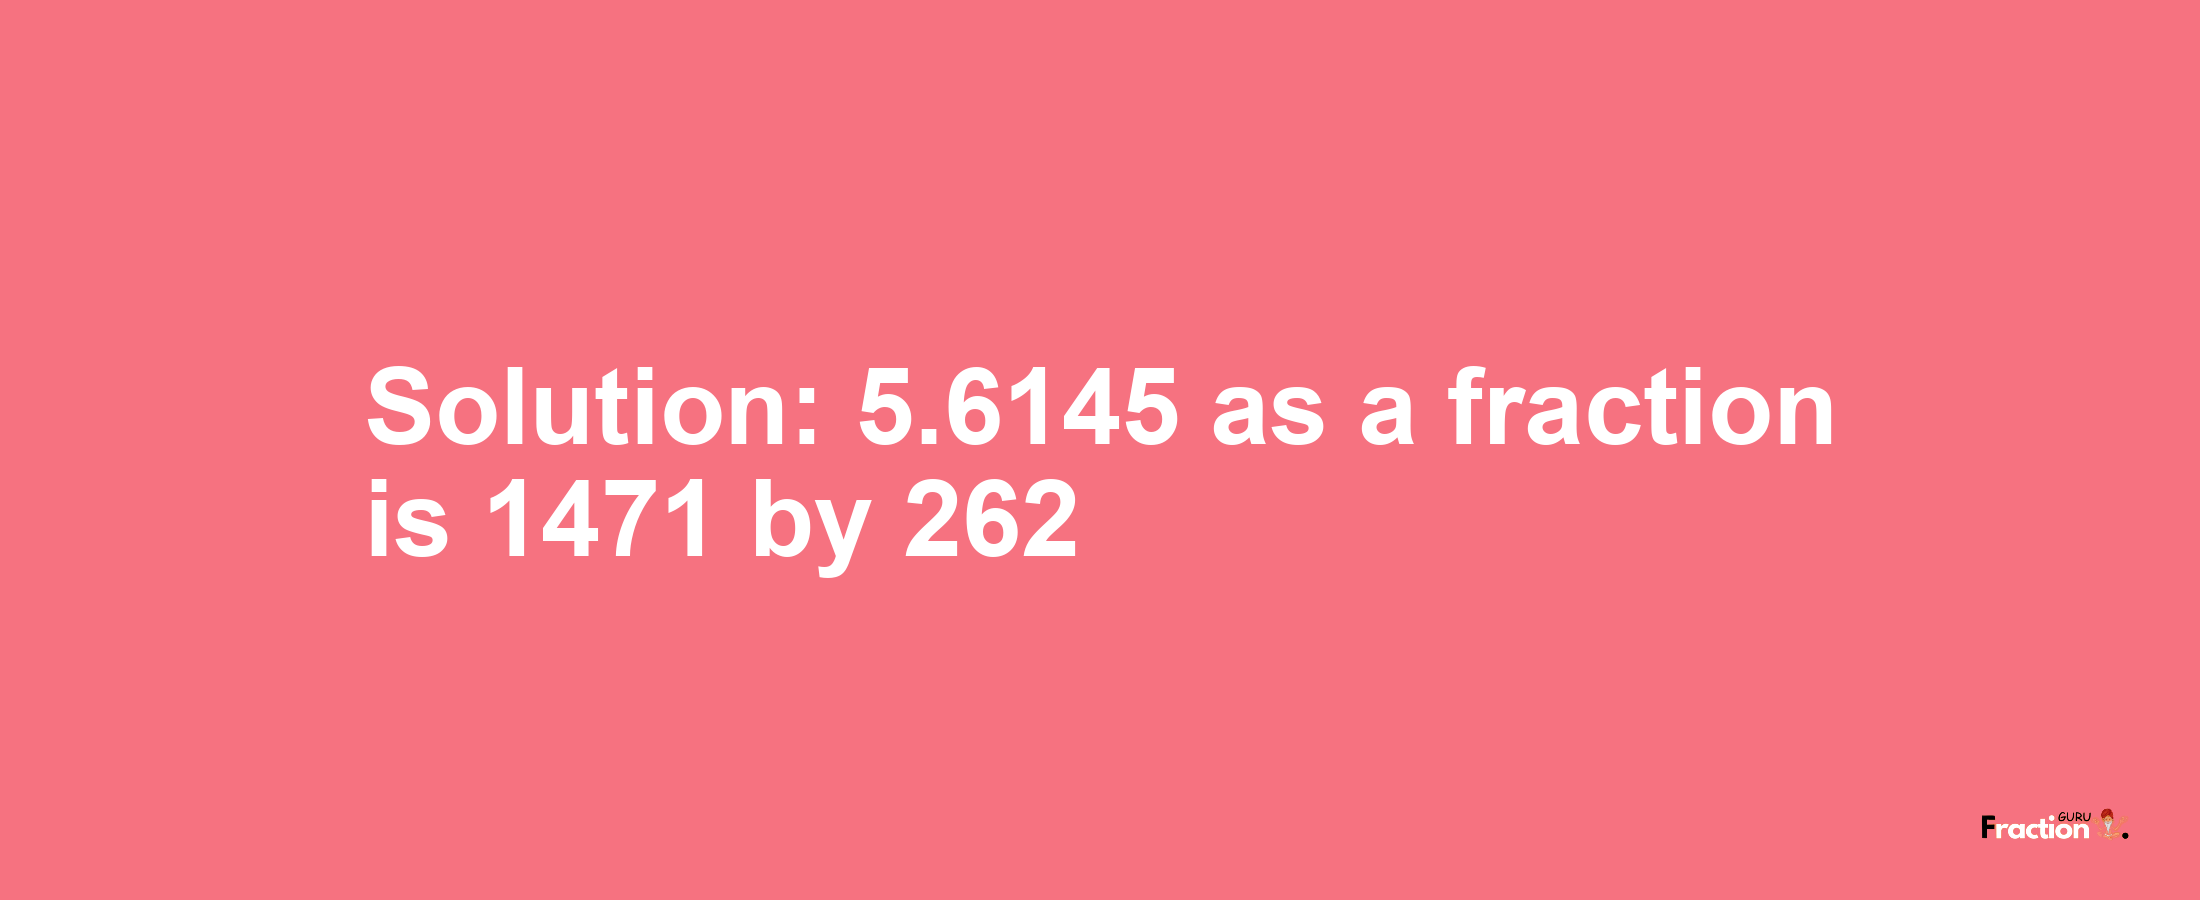 Solution:5.6145 as a fraction is 1471/262